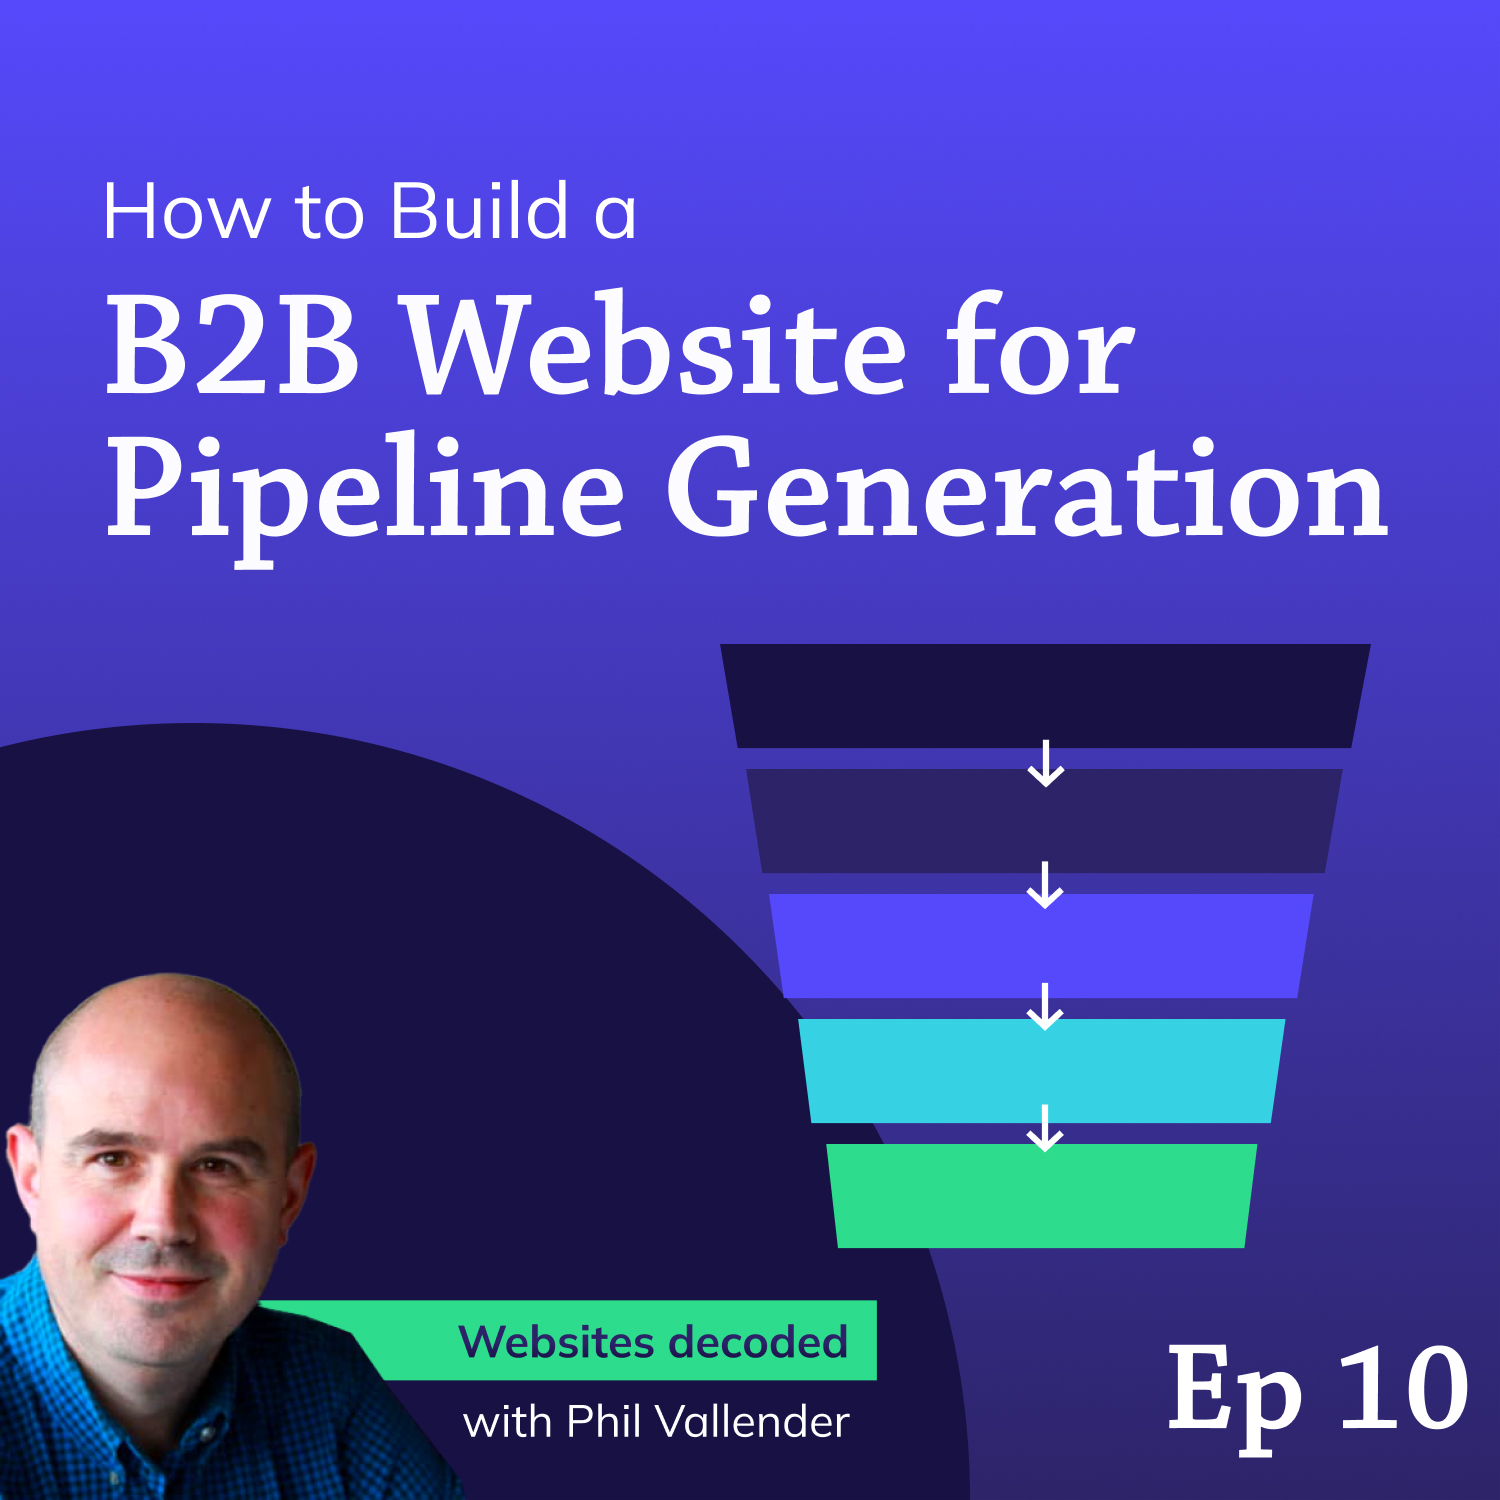 How to Build a B2B Websites for Pipeline Generation